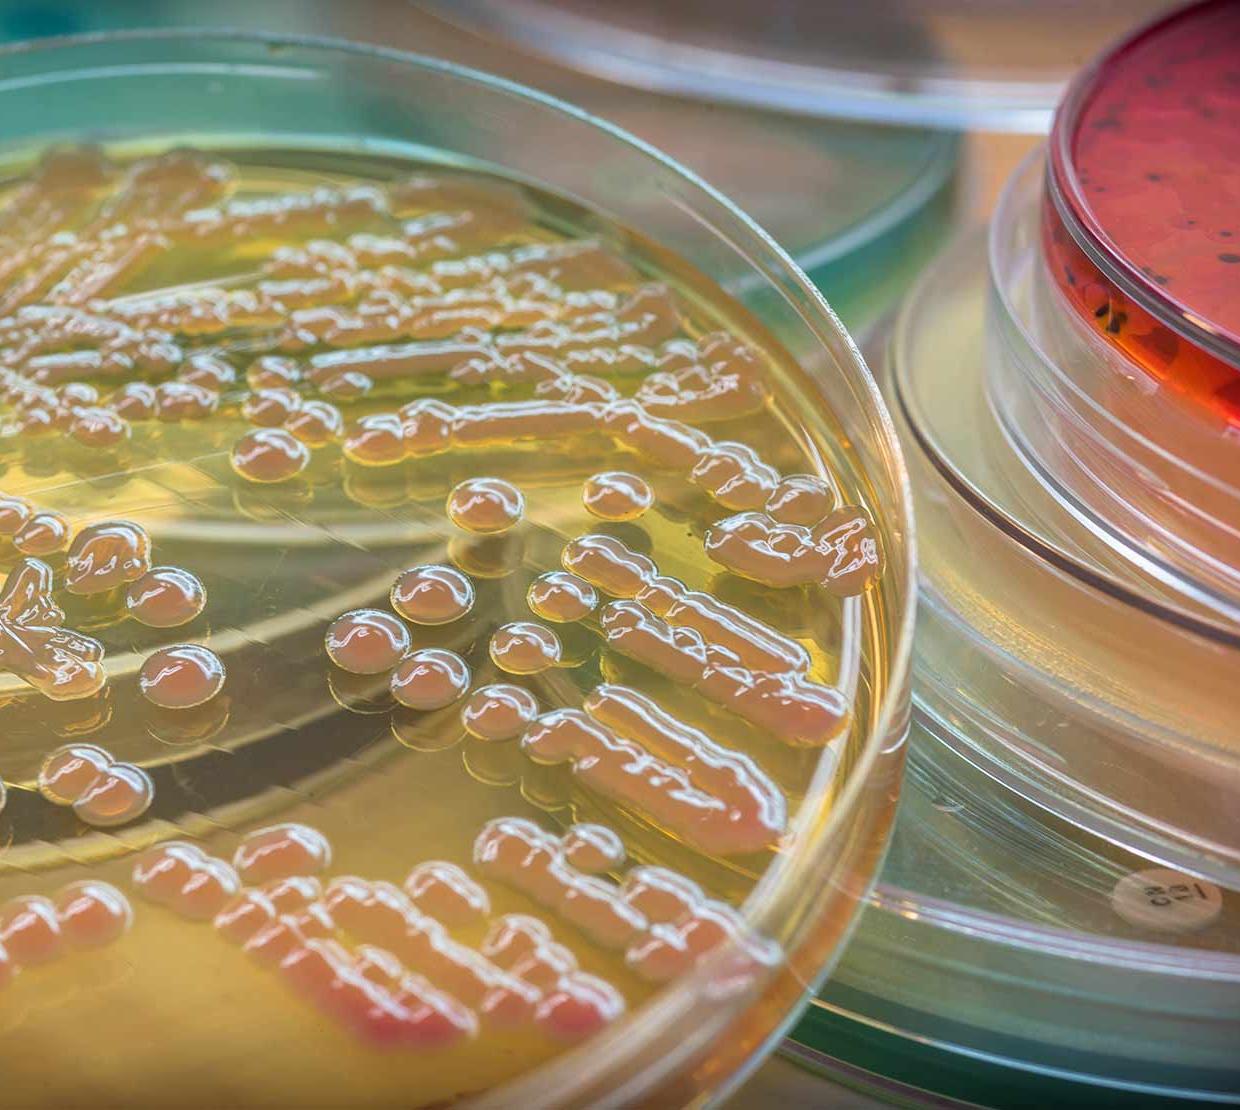 bacteria in pile of Petri dishes